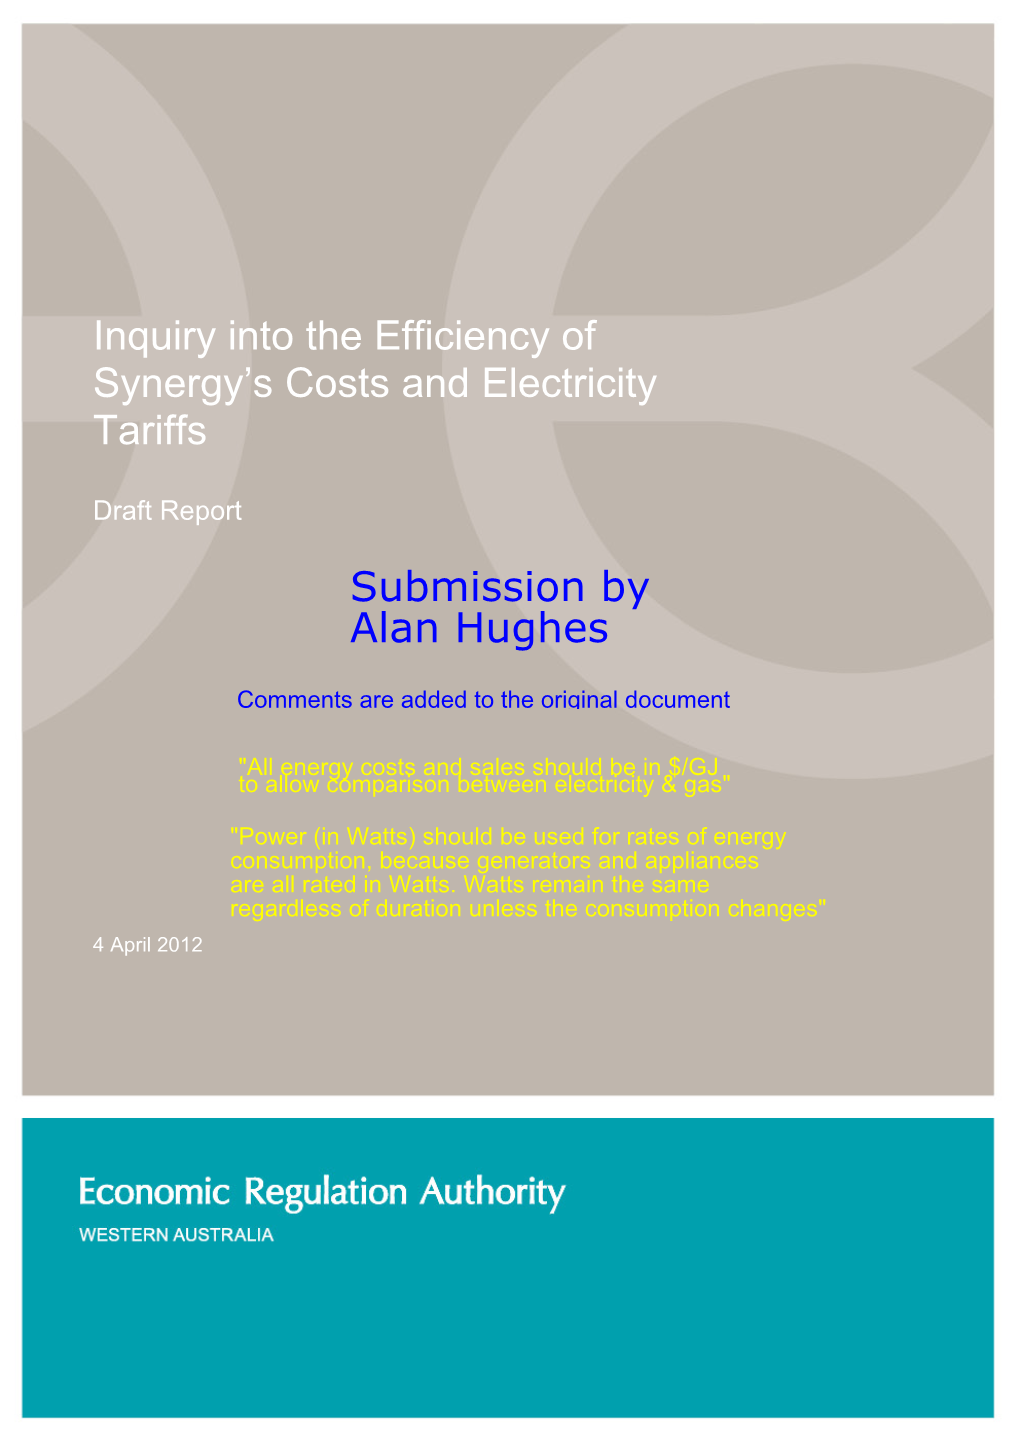 Inquiry Into the Efficiency of Synergy's Costs and Electricity Tariffs